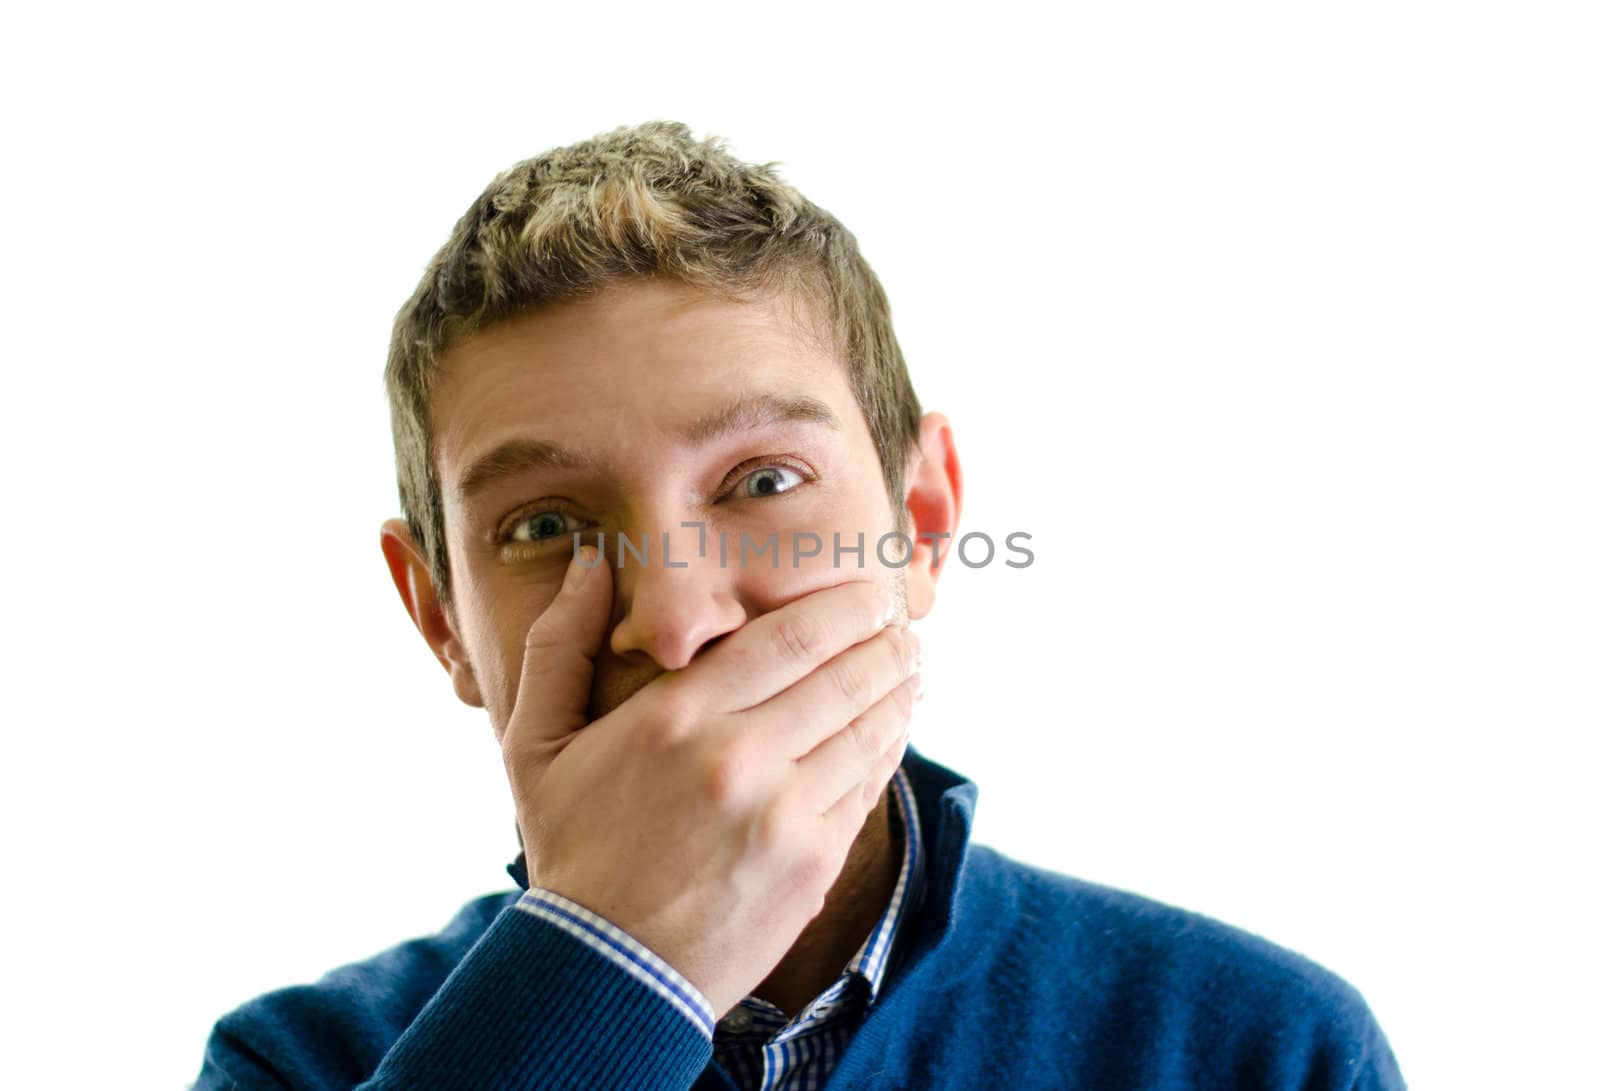 Handsome young man covering mouth with hand by artofphoto